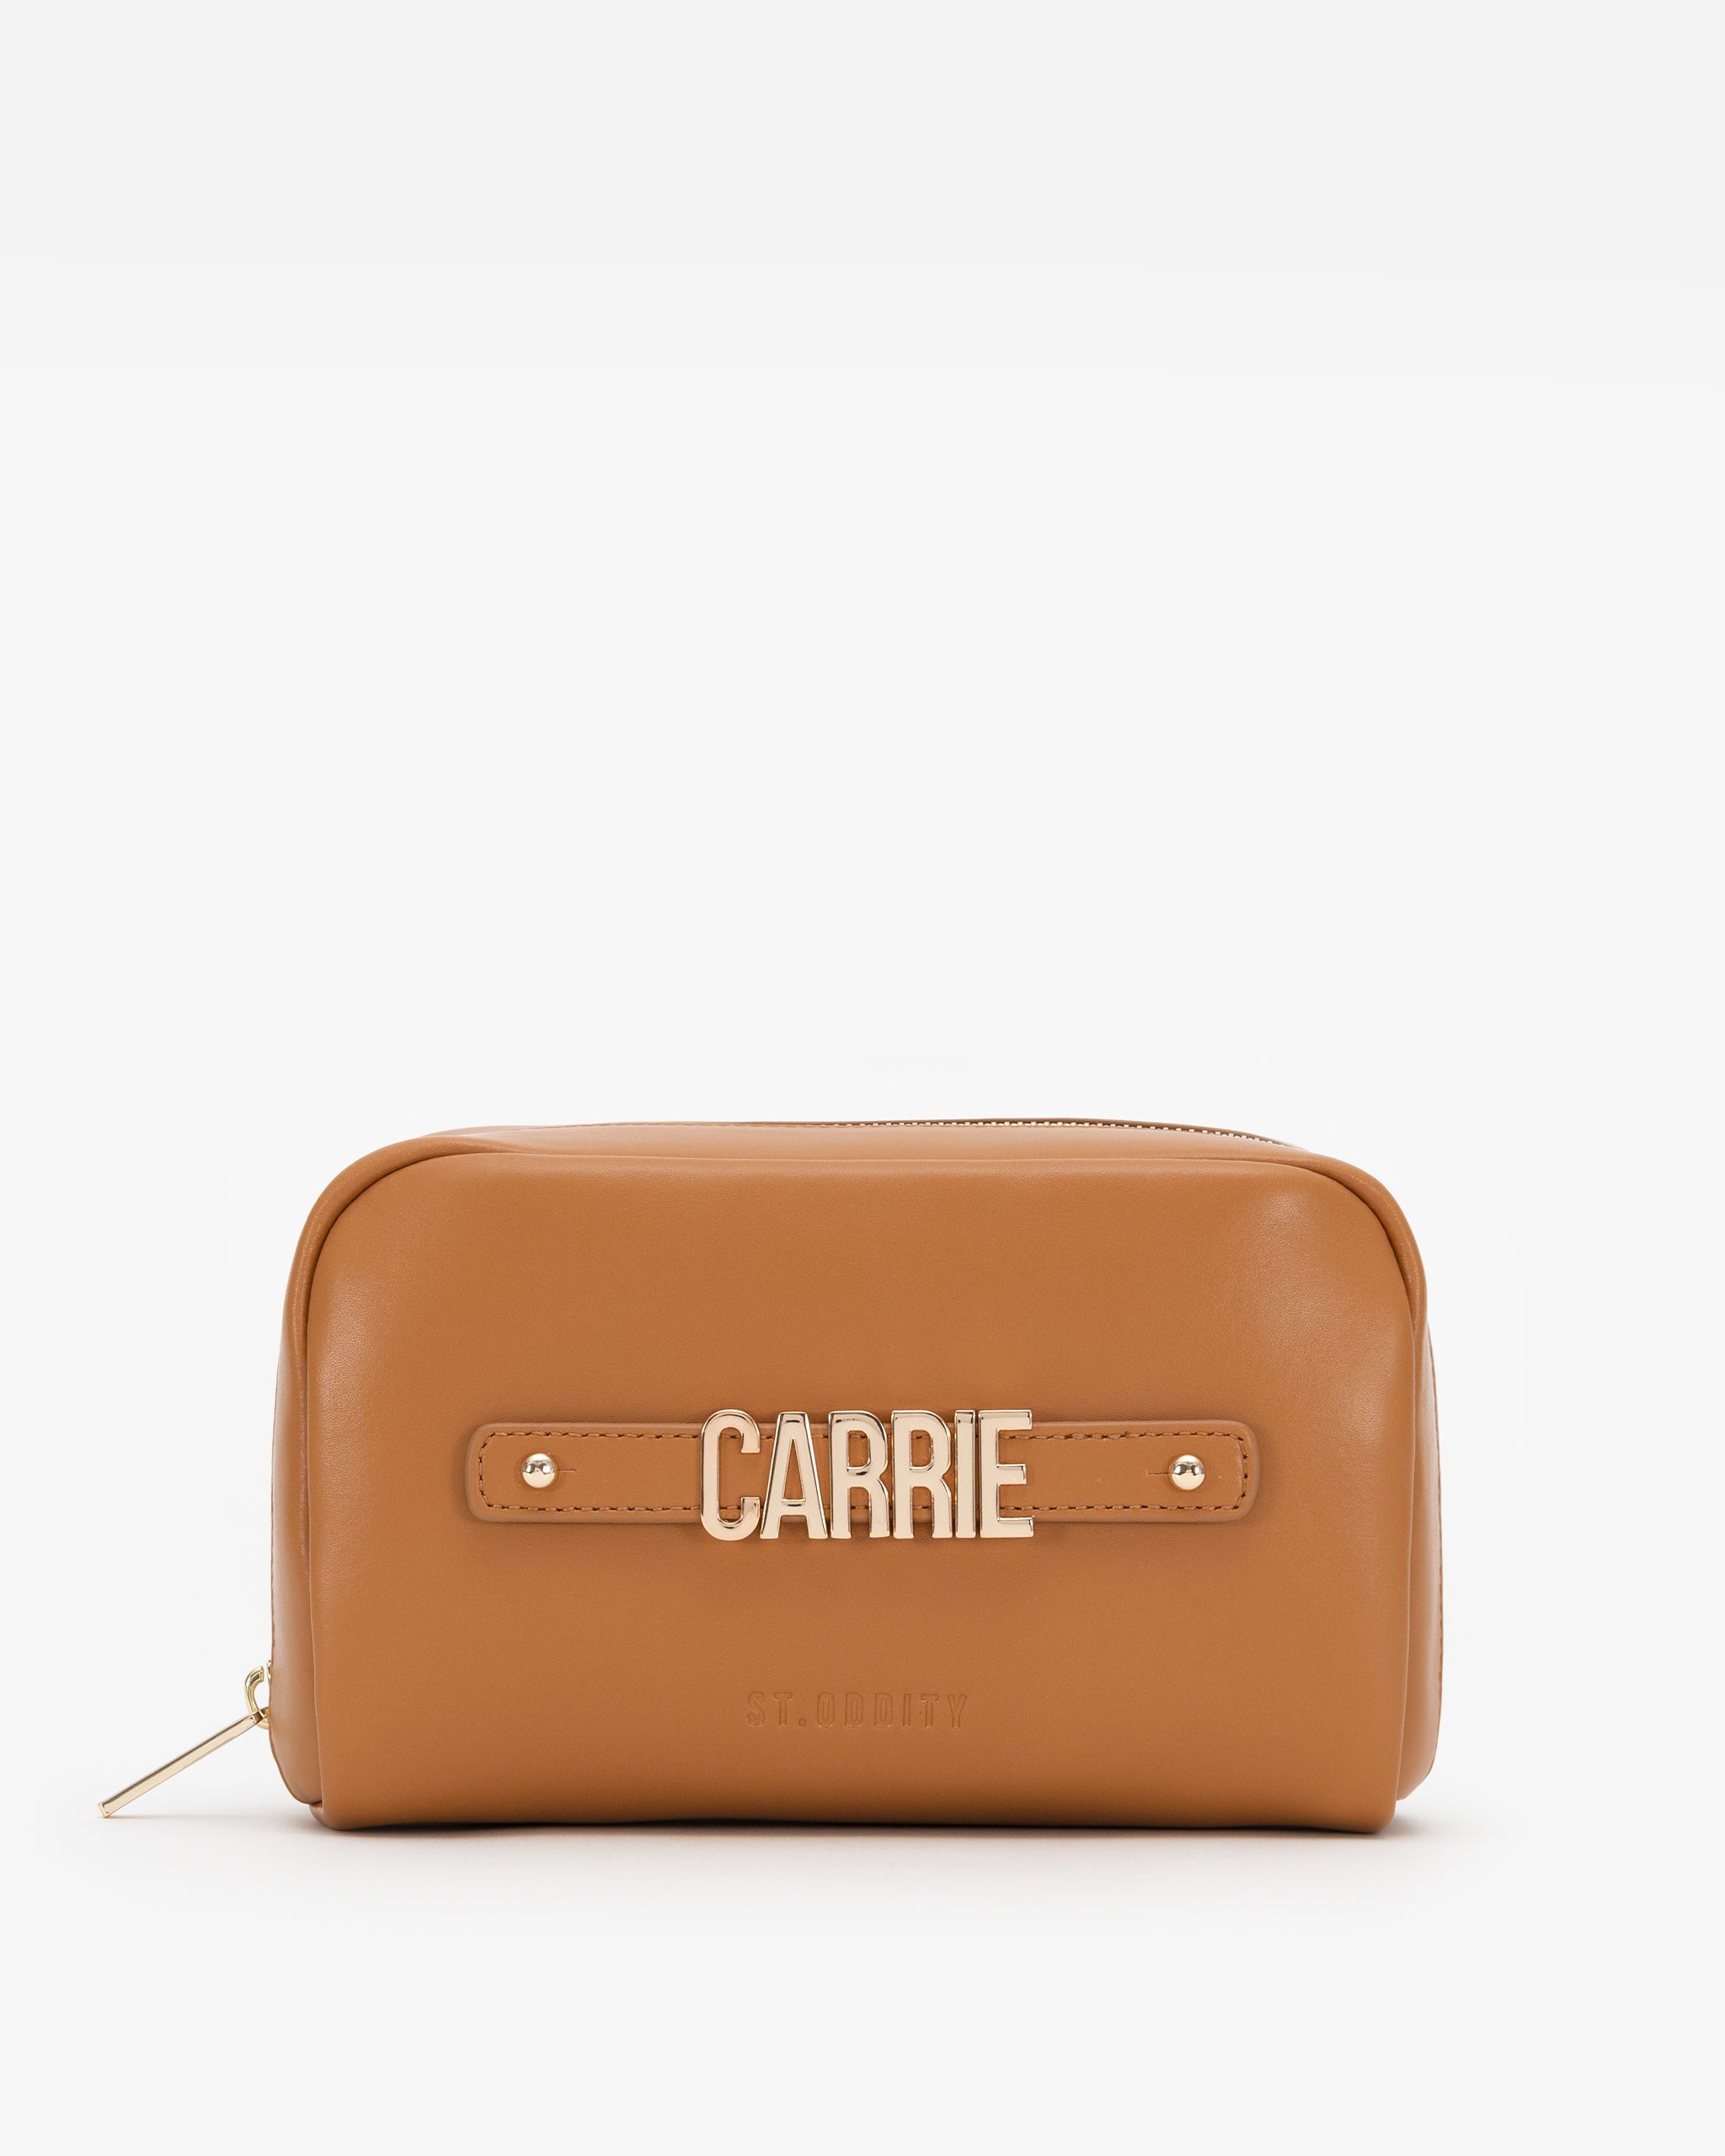 Cosmetic Pouch in Caramel with Personalised Hardware